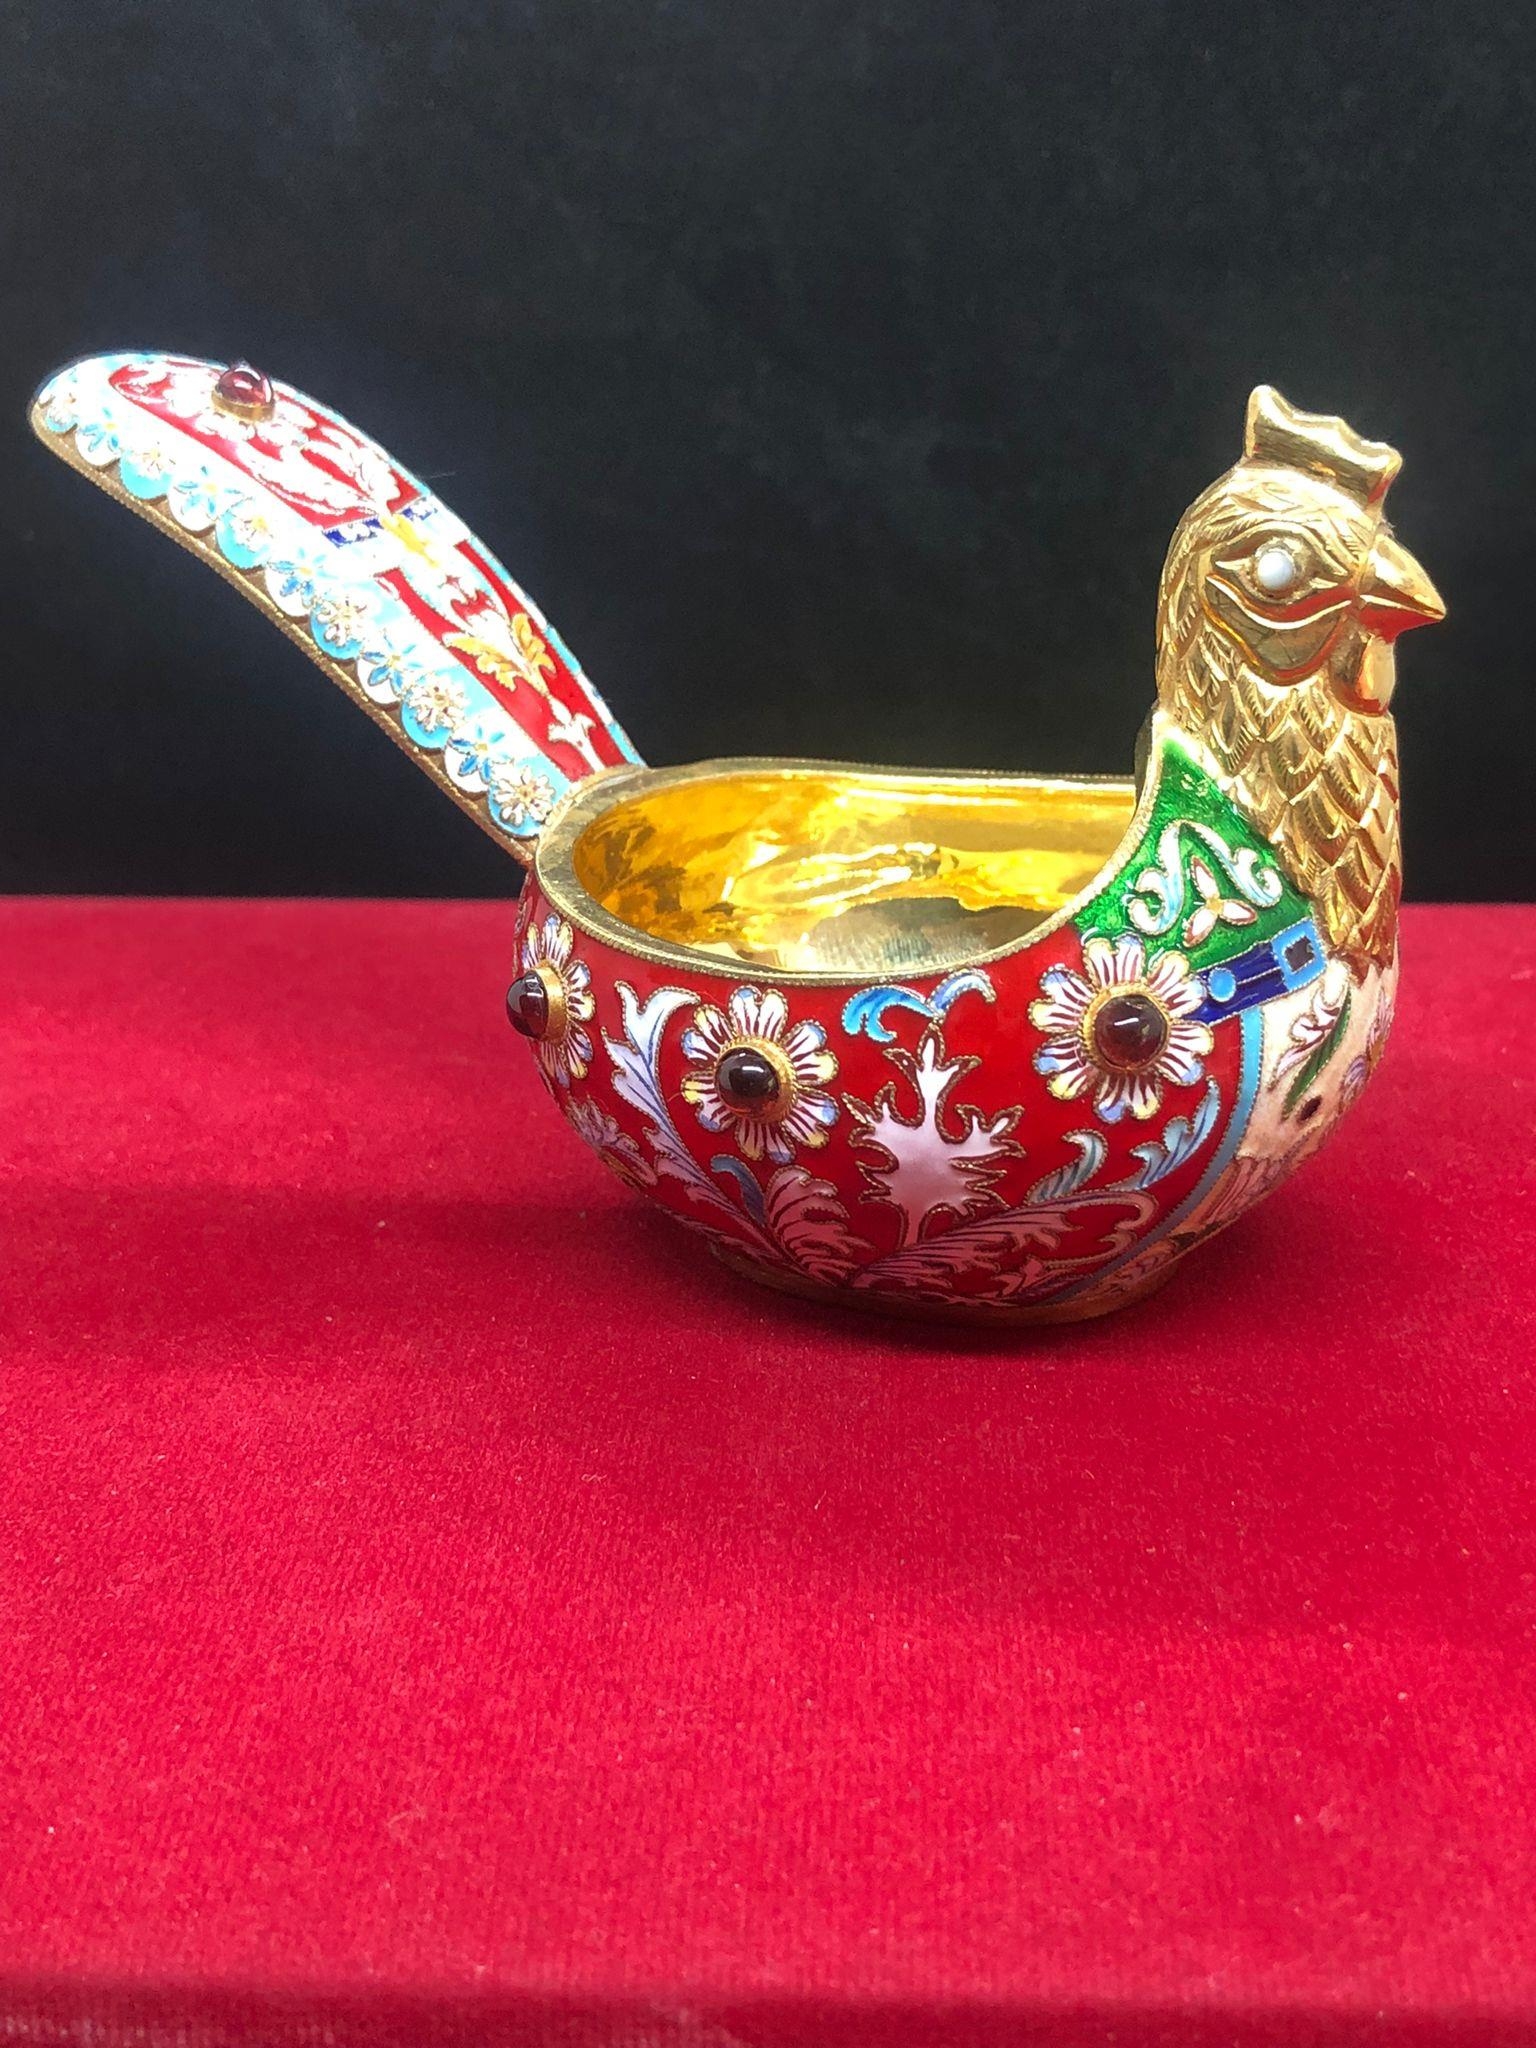 A large Russian silver enamel gem set Russian bird kovsh in red colour theme. Length to tail 13cm